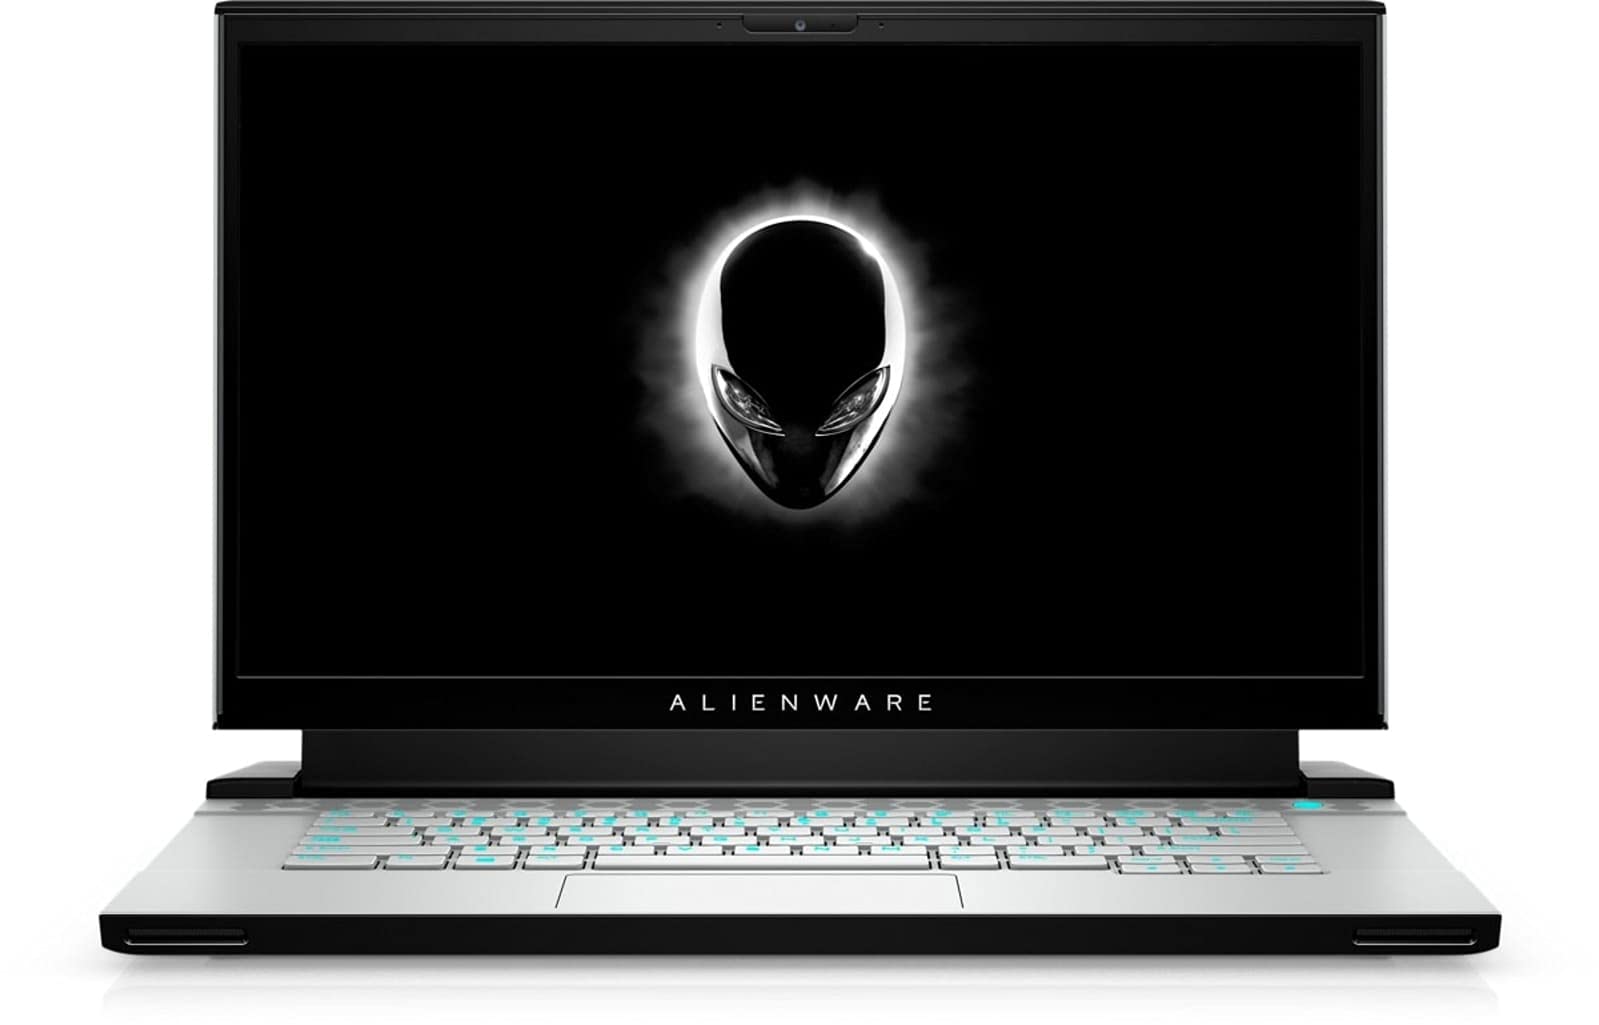 Dell Alienware m15 R3 Gaming Laptop (2020) | 15.6